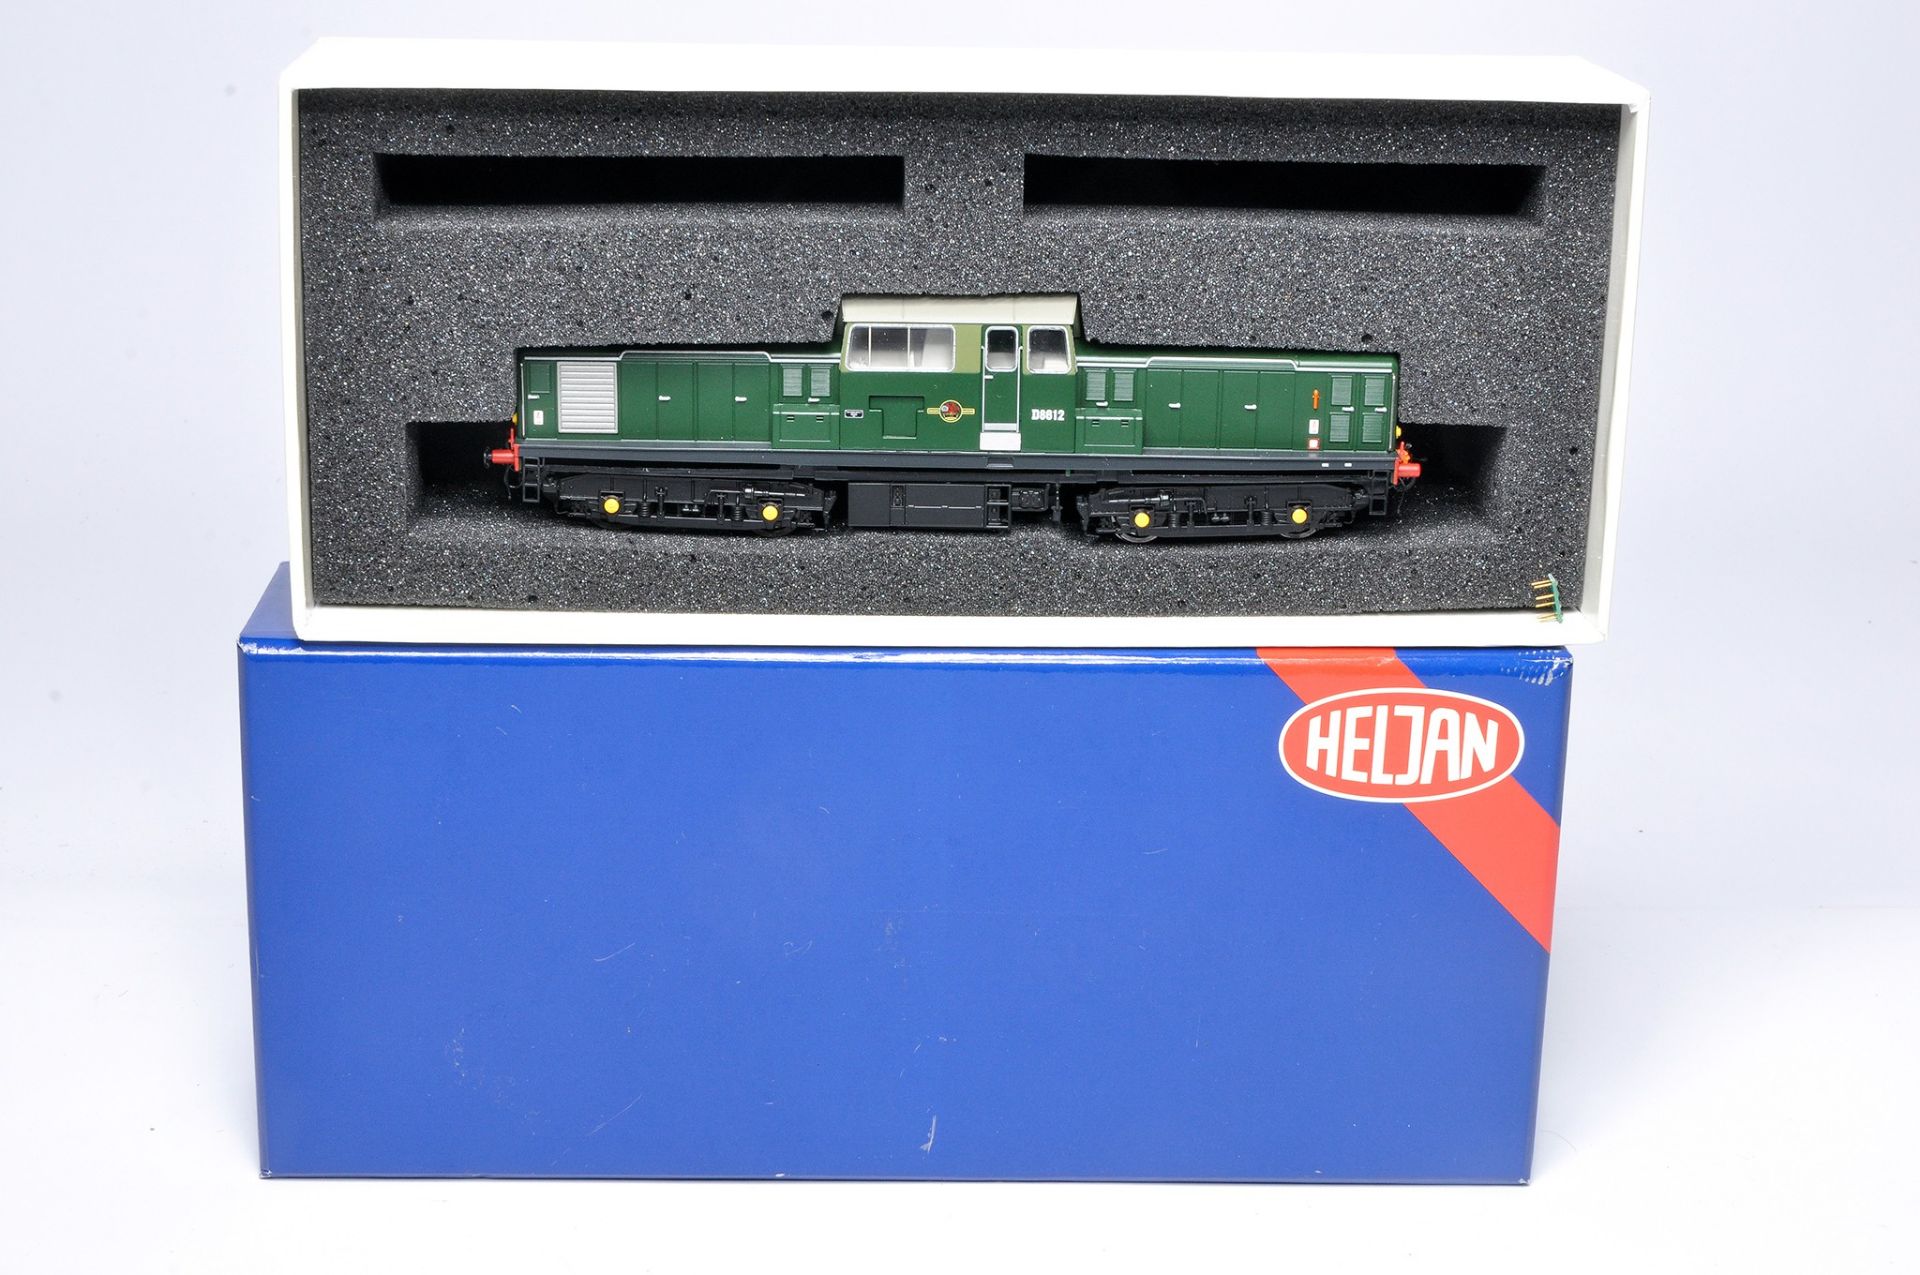 Heljan Model Railway comprising locomotive issue No. 17071 Class 17 Clayton D8612. Looks to be